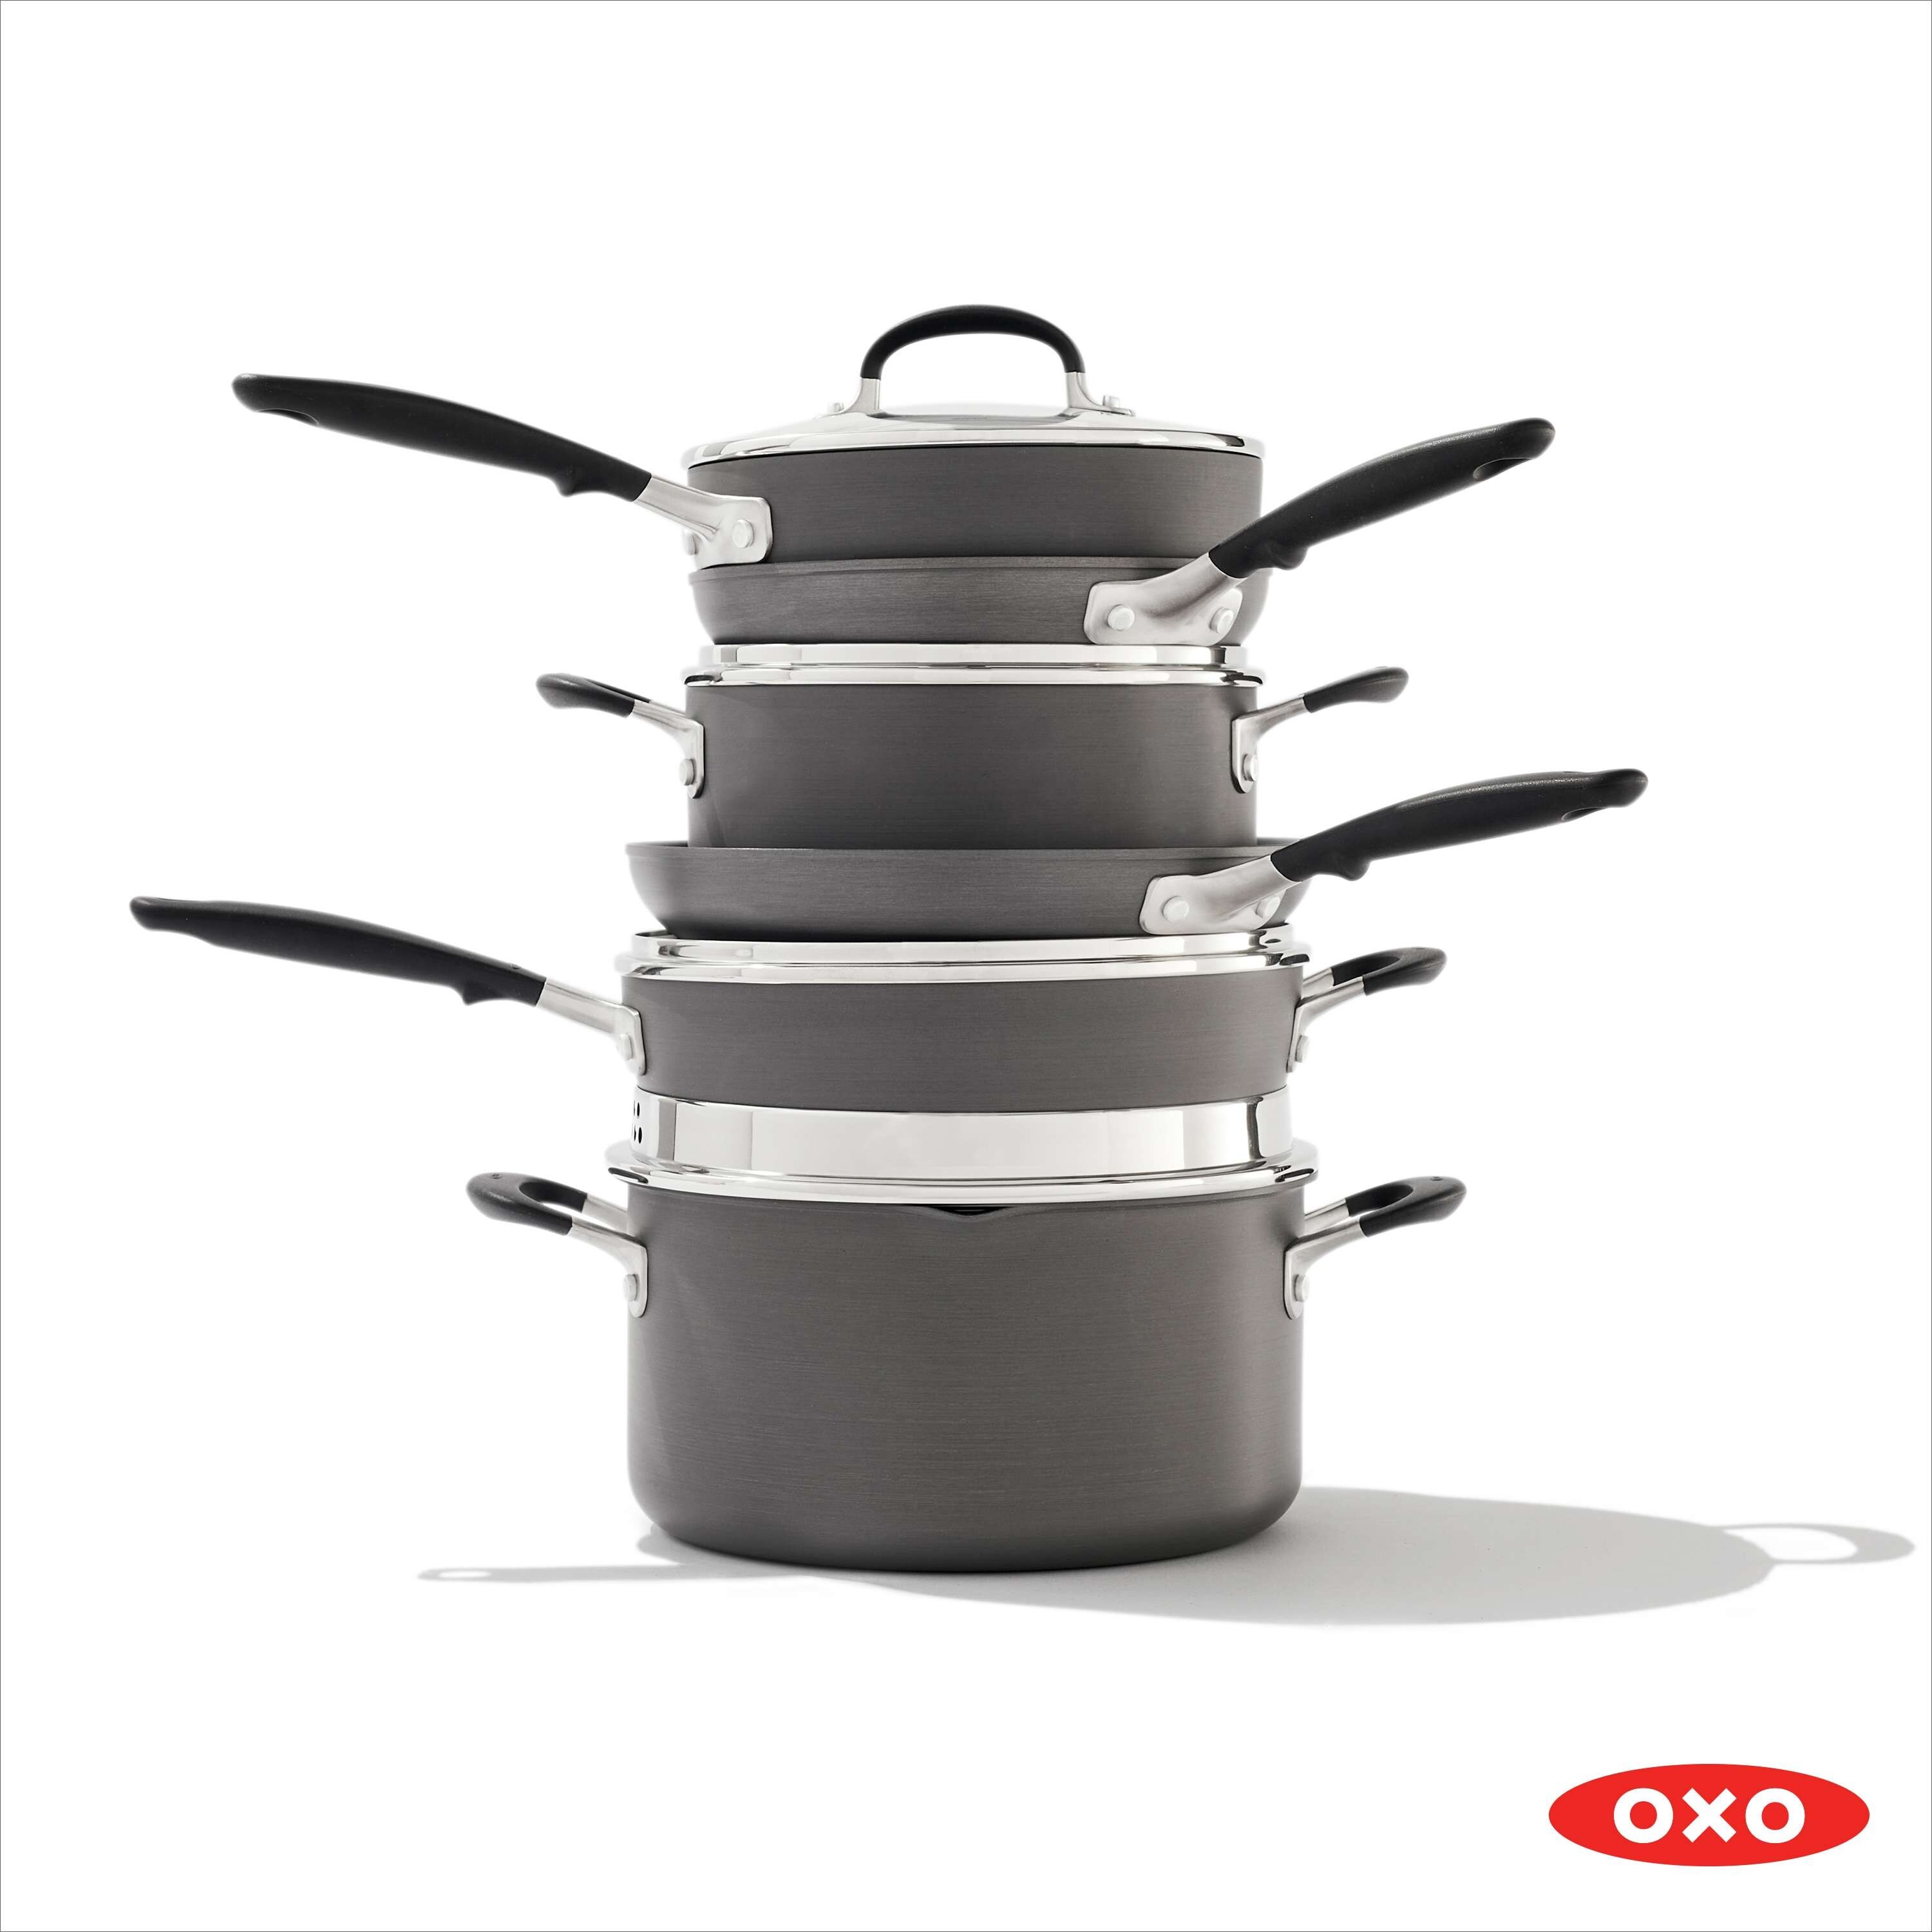 https://ak1.ostkcdn.com/images/products/is/images/direct/8e6680f4c7d5f0fc04b124607321fab592febfc4/OXO-Good-Grips-Non-Stick-10pc-Set.jpg